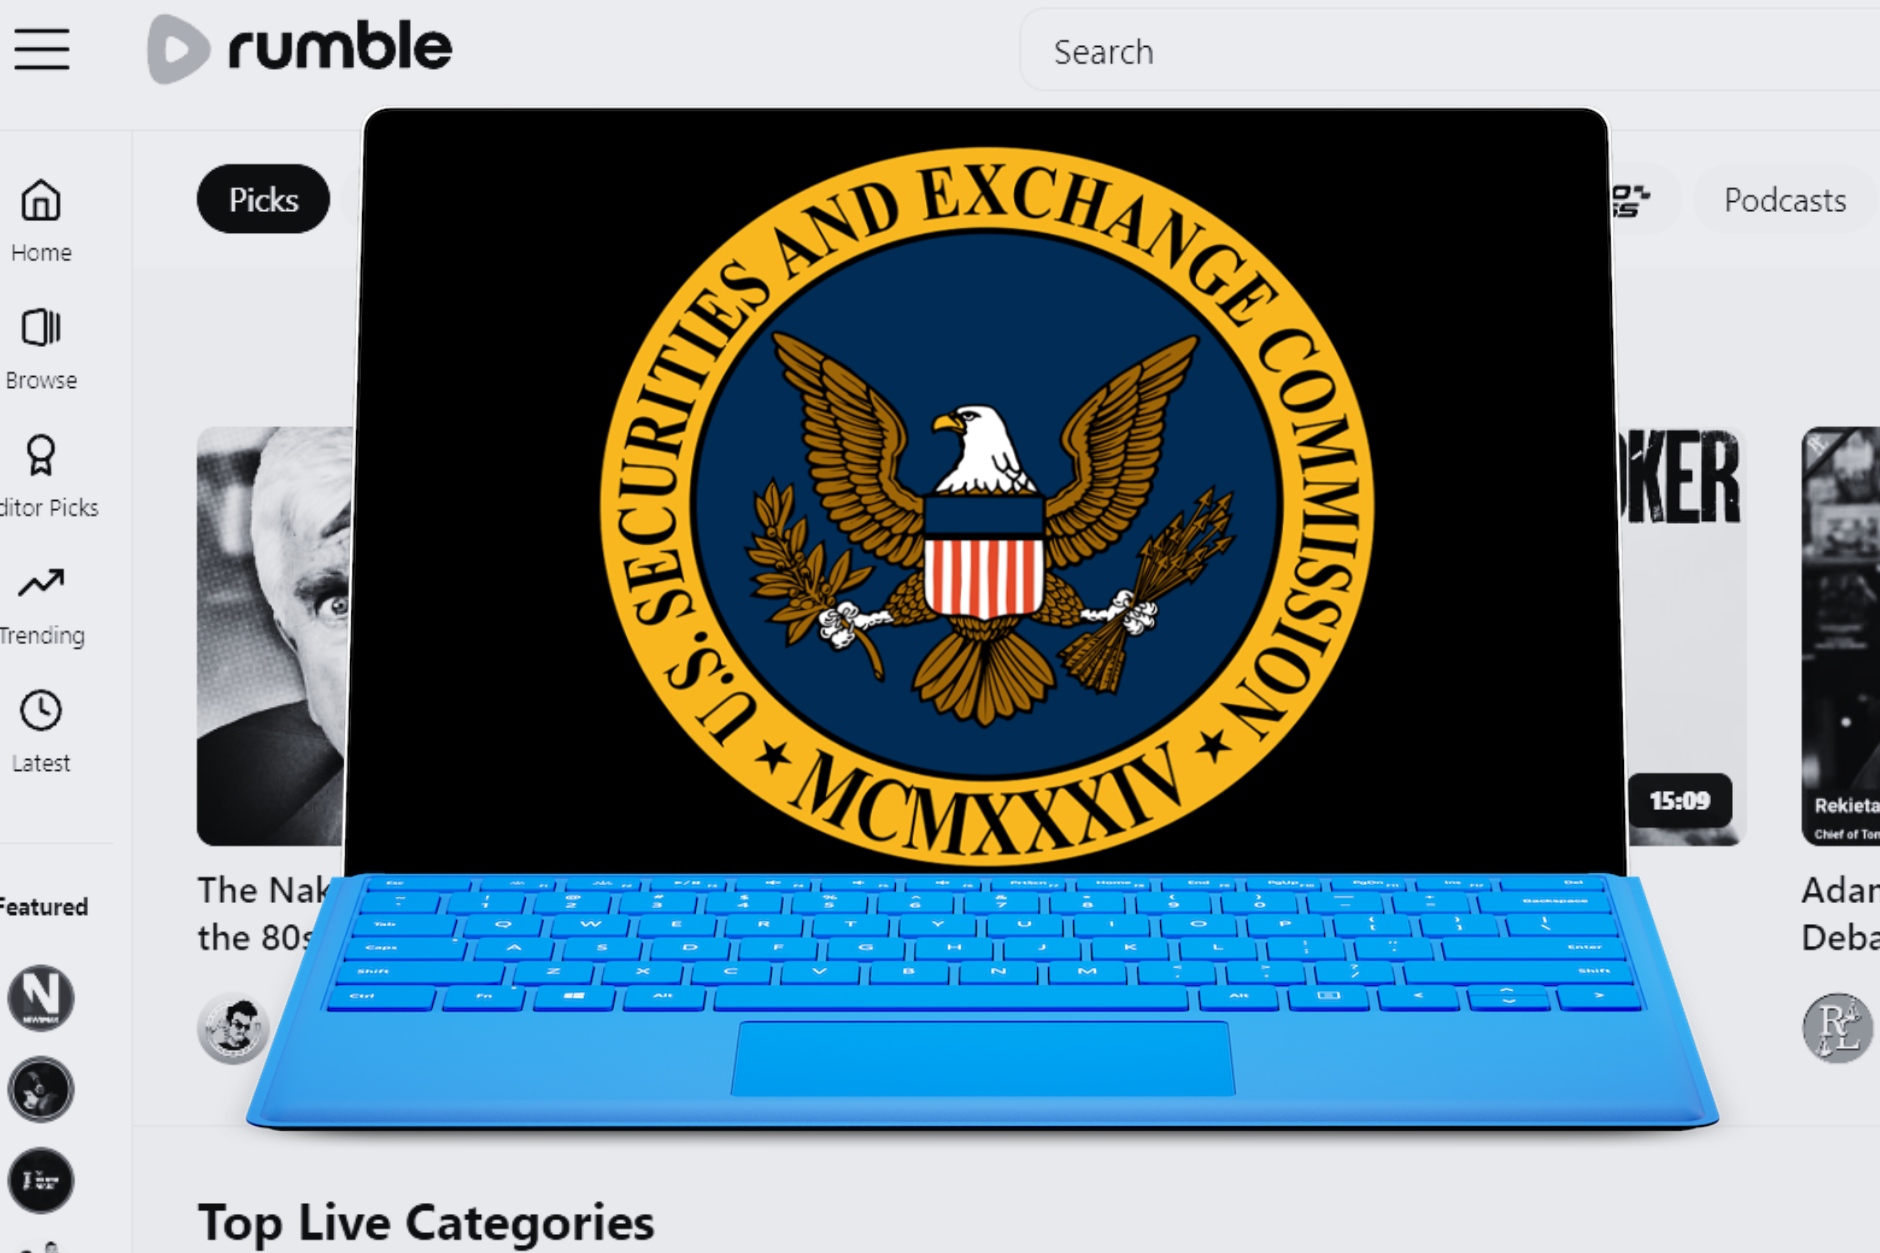 Rumble: ‘active and ongoing’ SEC investigation into video platform